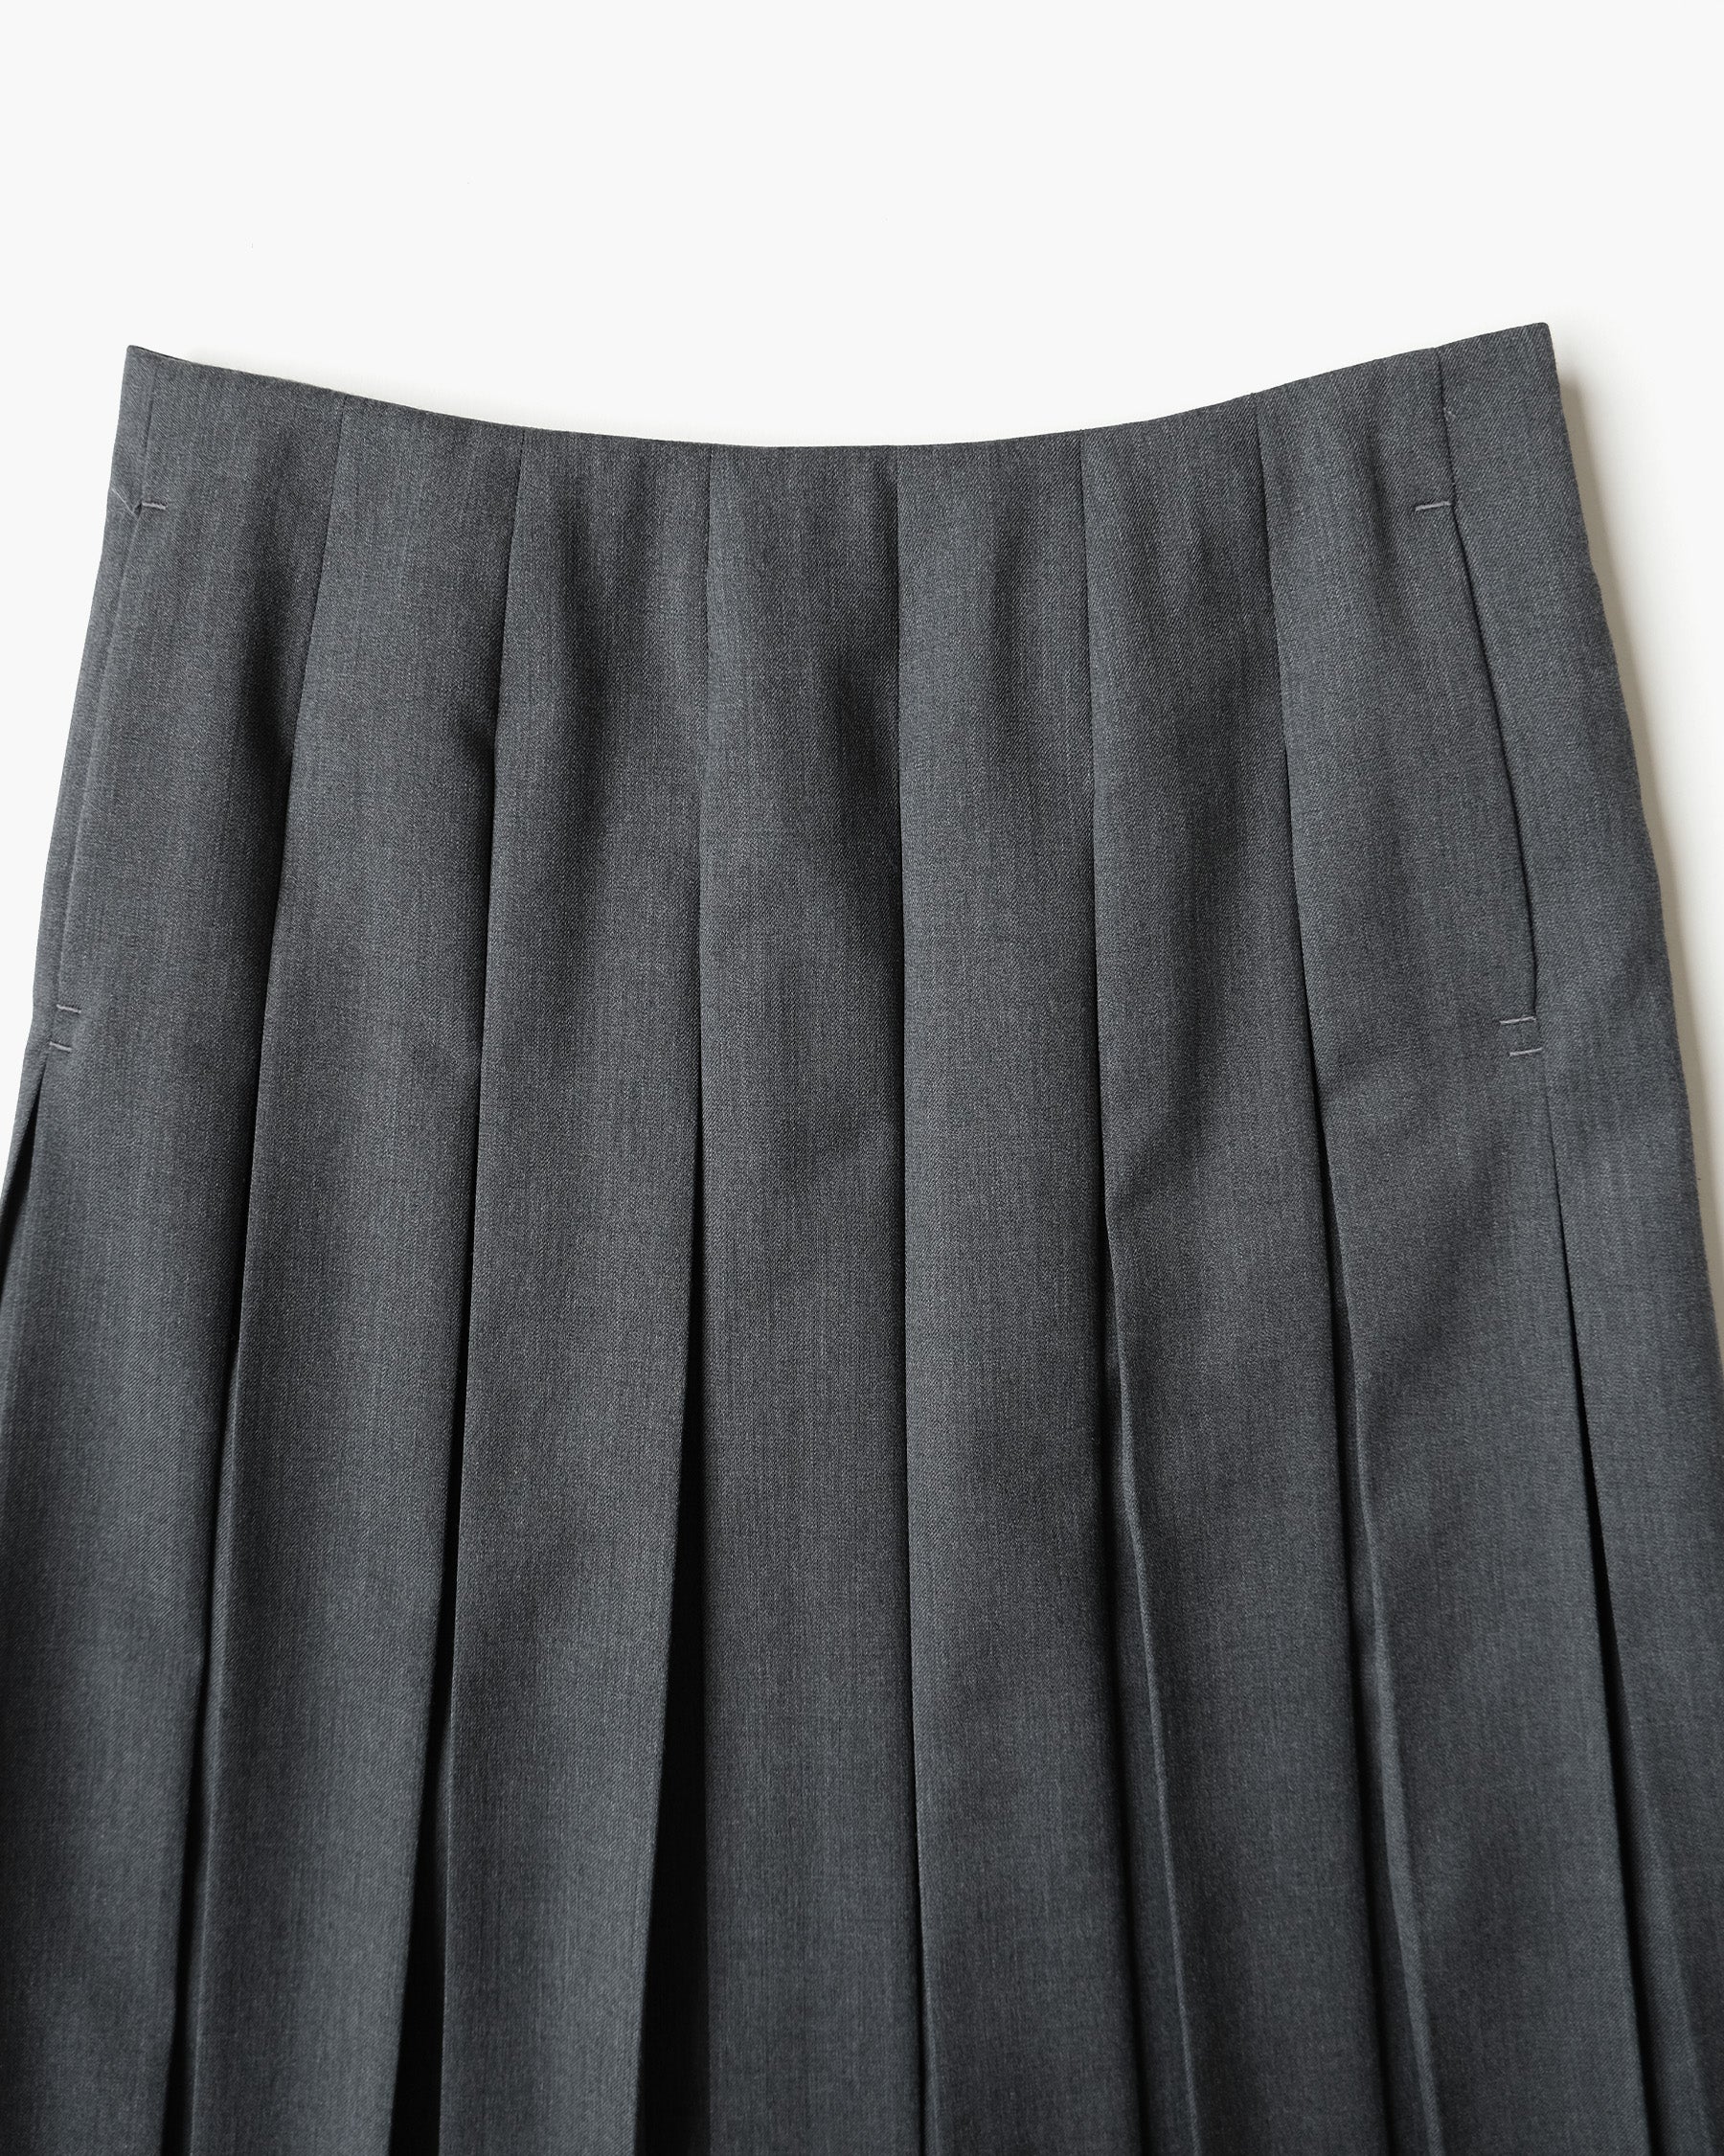 studiolab404.com] Angels Factory Pleated Skirt by 404